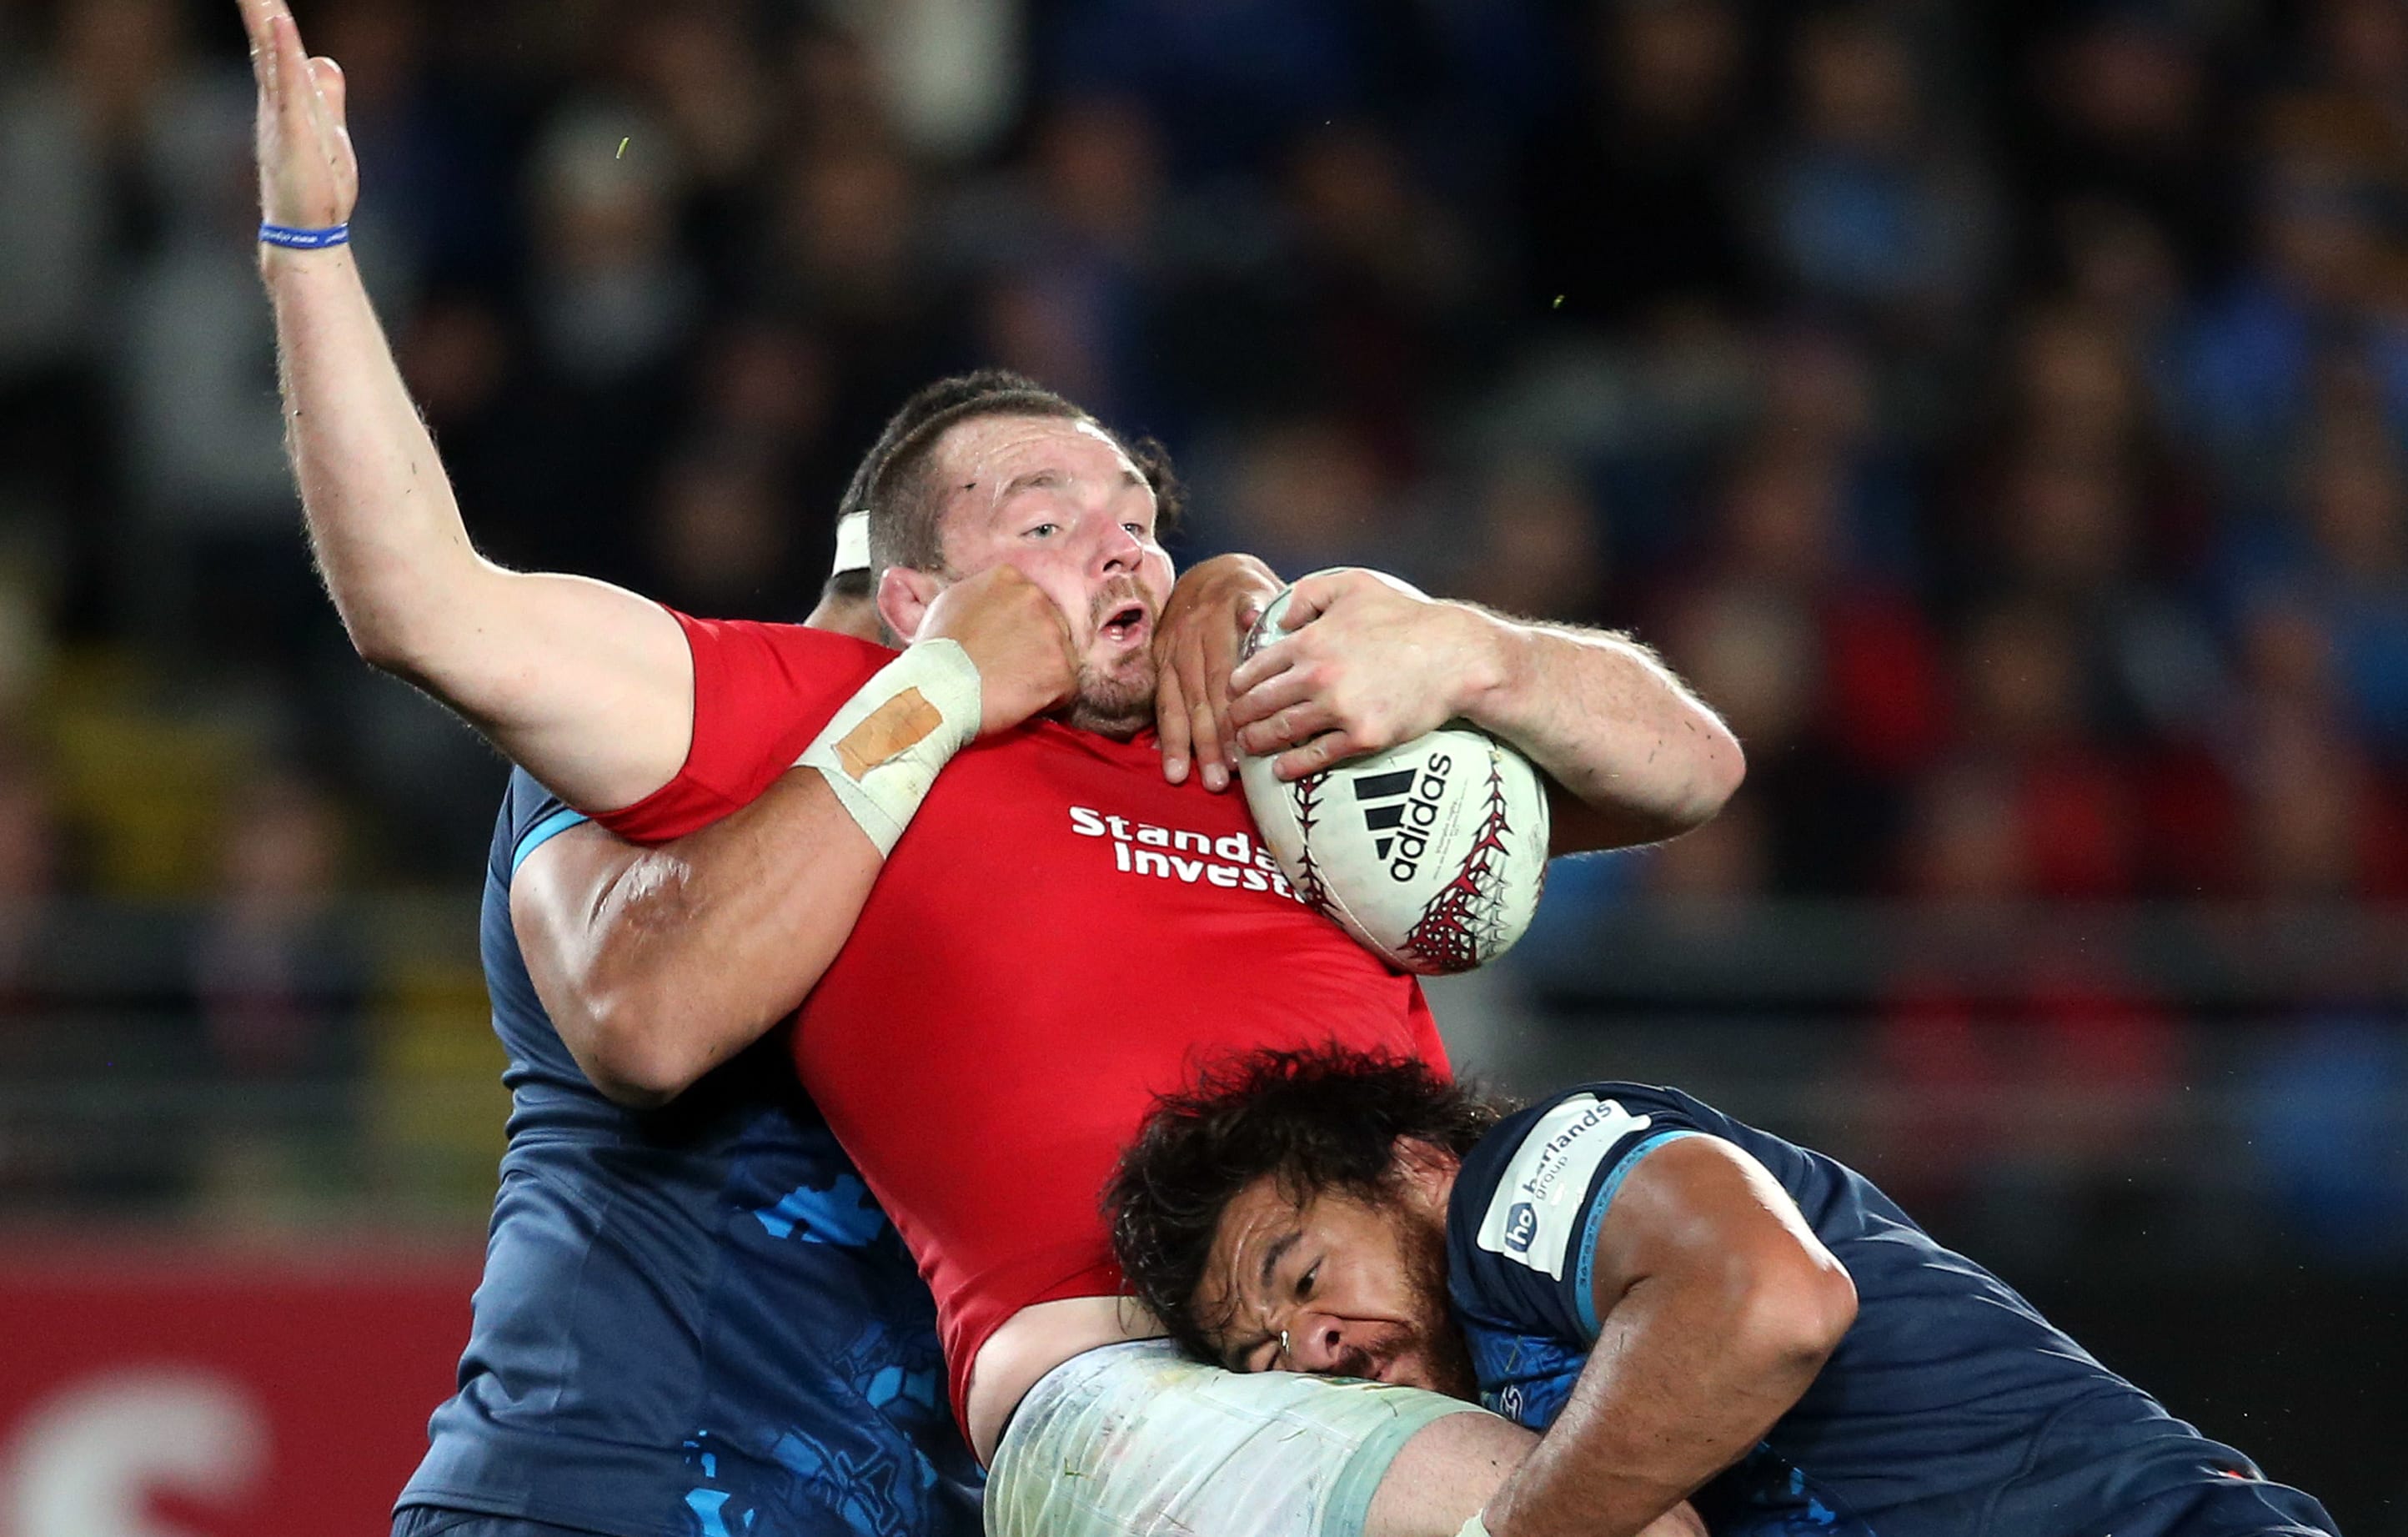 British and Irish Lions captain Ken Owens (C) is tackled by Blues' Alex Hodgman (L) and Steven Luatua (R) during the rugby match between The British and Irish Lions and Auckland Blues at Eden Park.